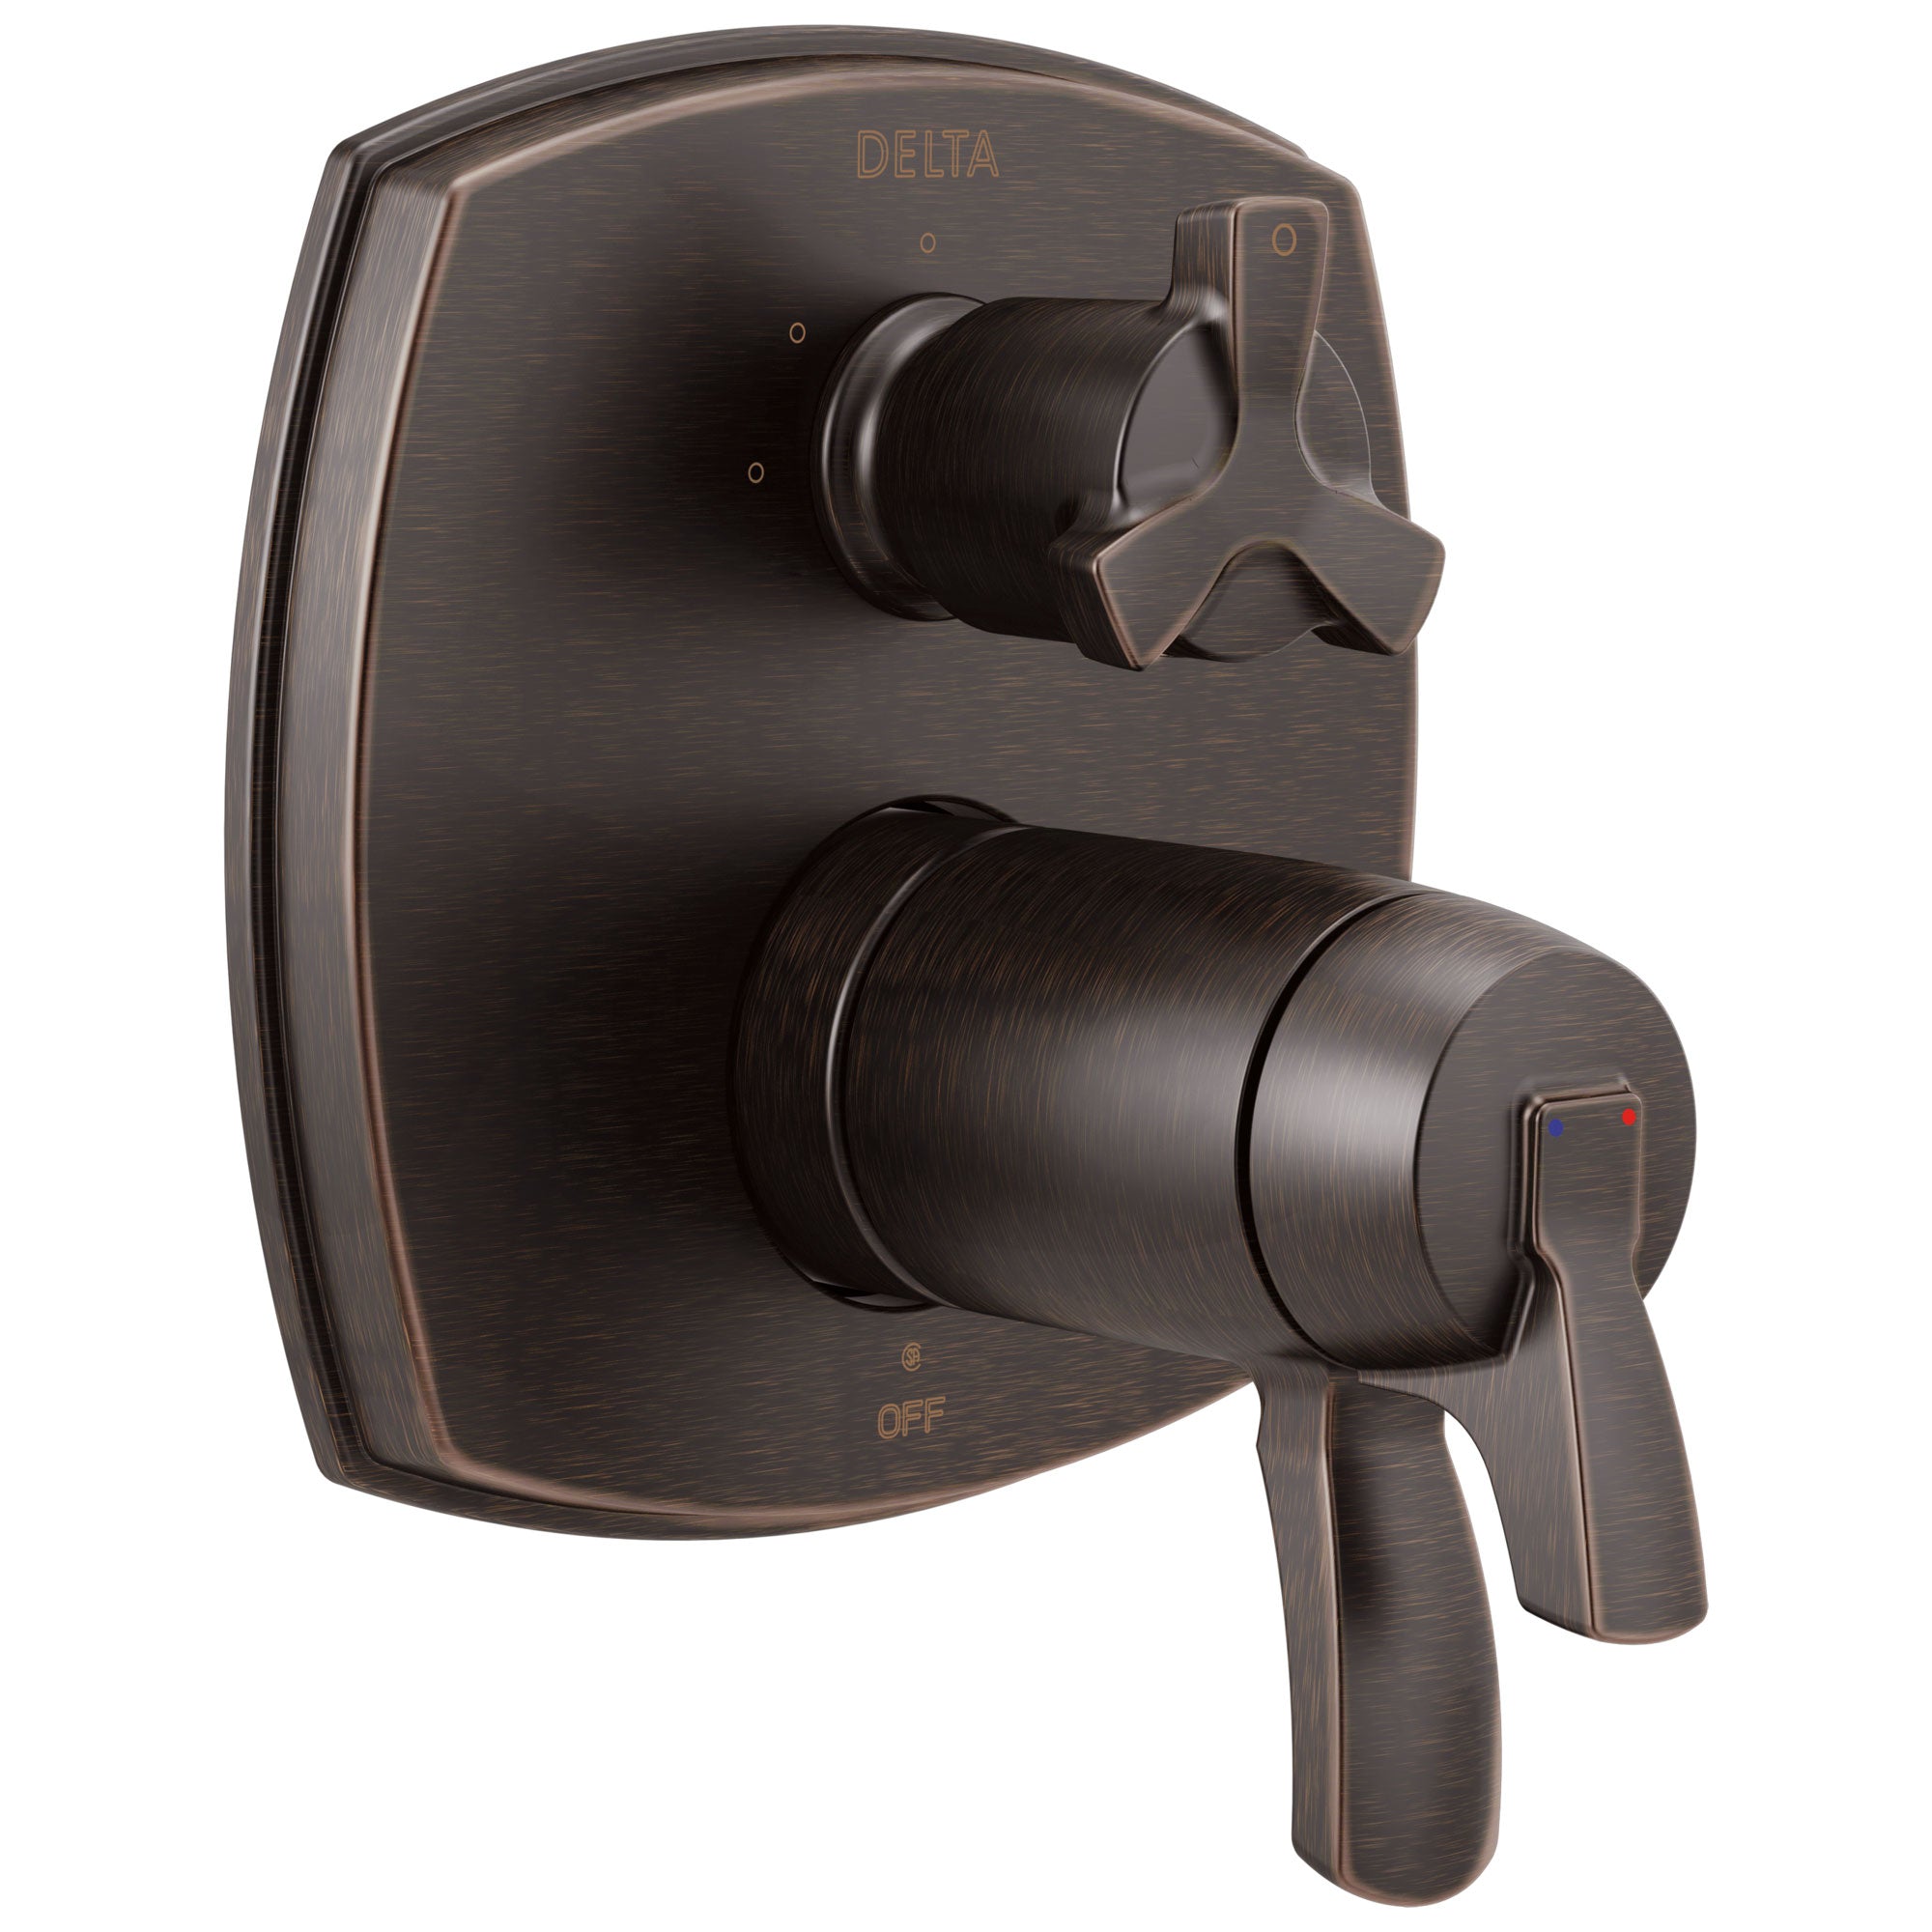 Delta Stryke Venetian Bronze Finish 3-setting Integrated Cross Handle Diverter Thermostatic Shower System Control Includes Valve and Handles D3684V